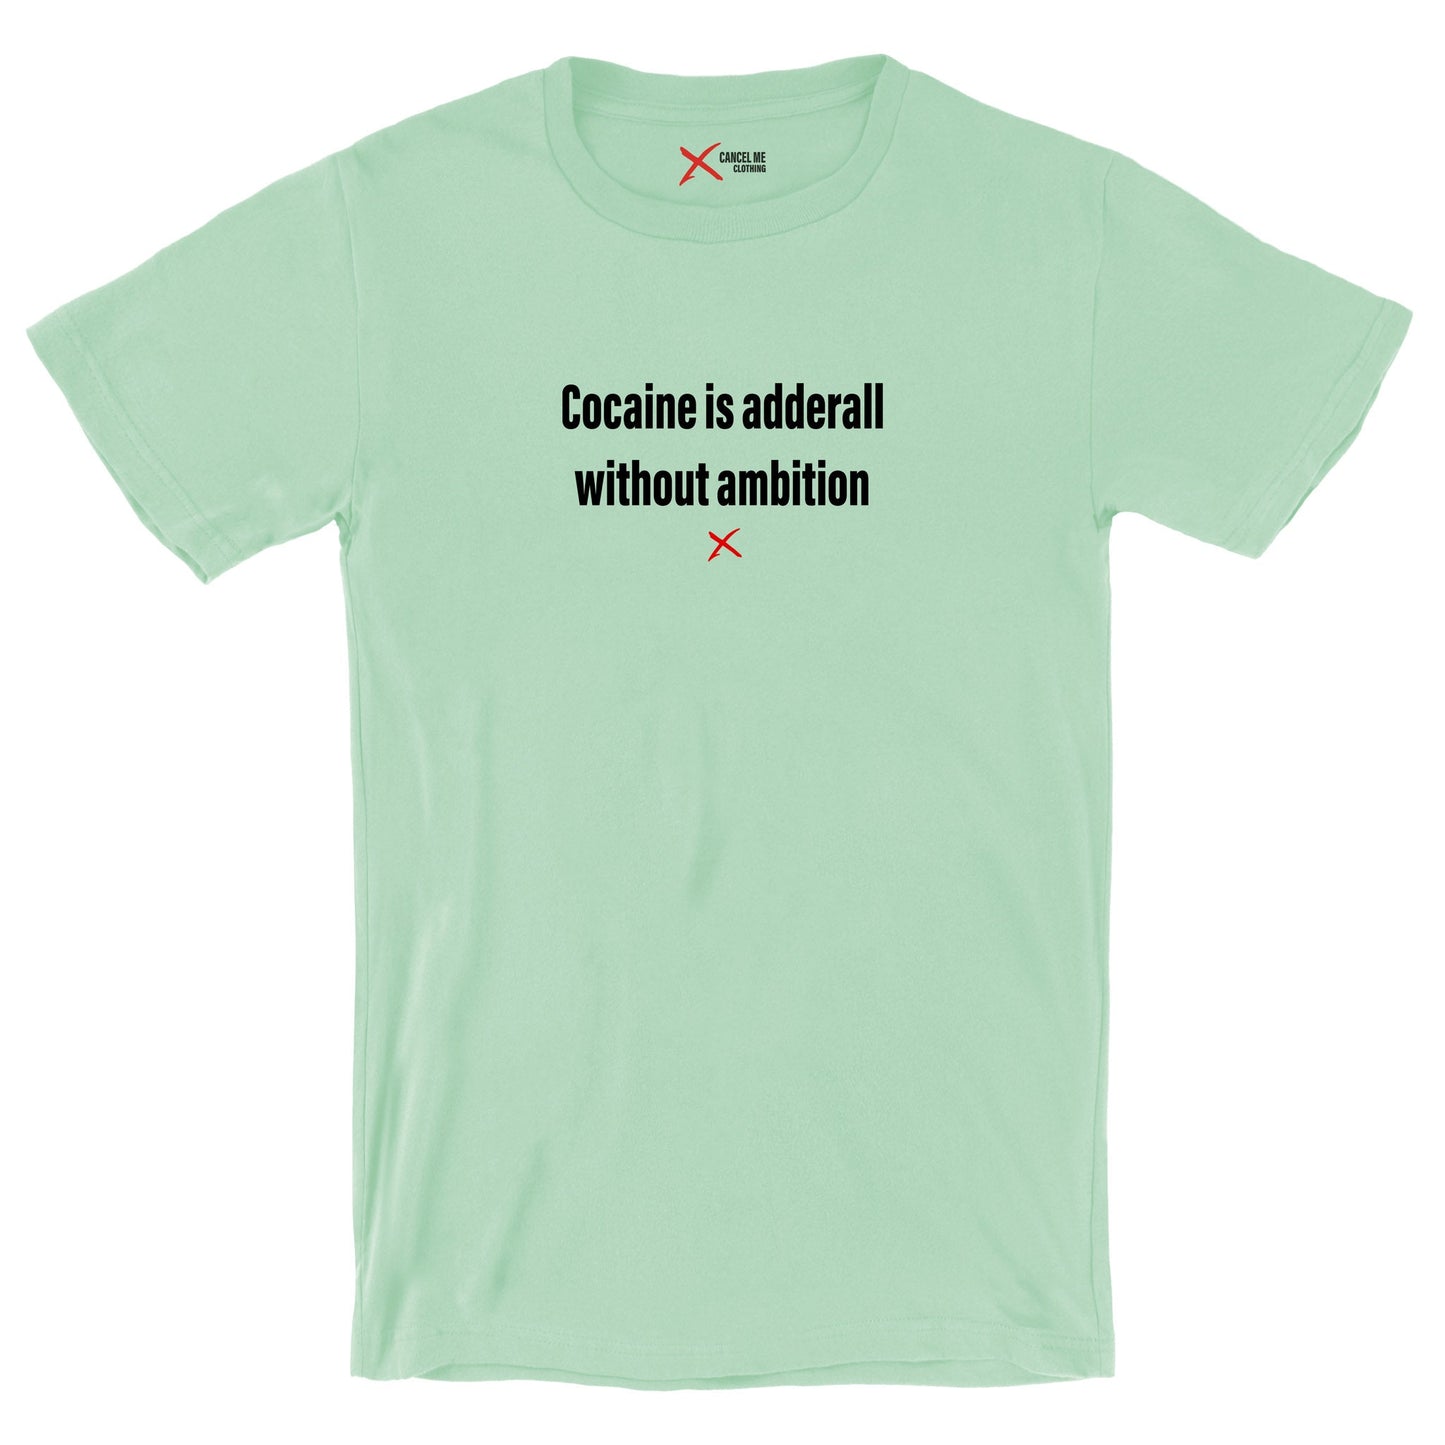 Cocaine is adderall without ambition - Shirt